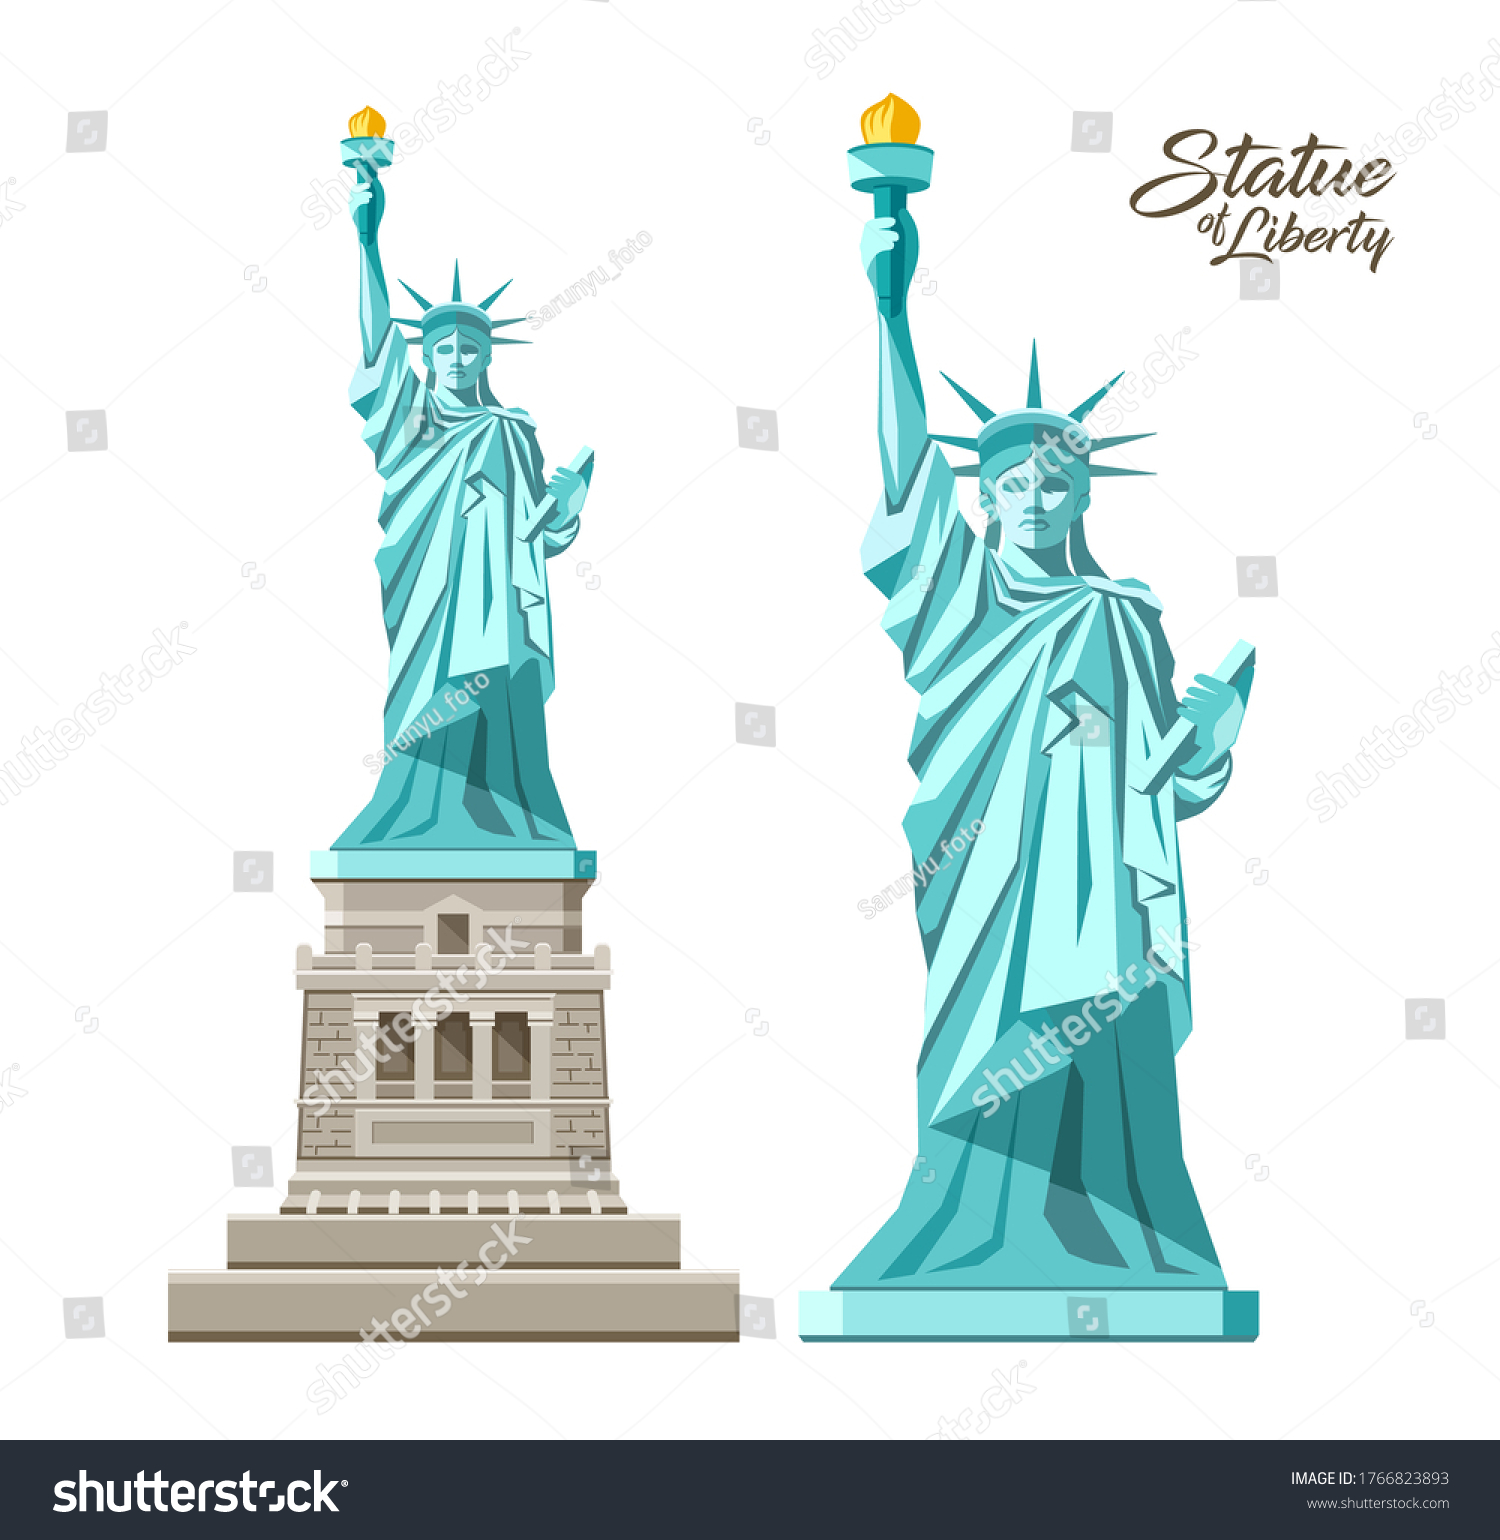 The Statue of Liberty vector, Liberty Enlightening the World, in the United States, collection design isolated on white background, illustration #1766823893